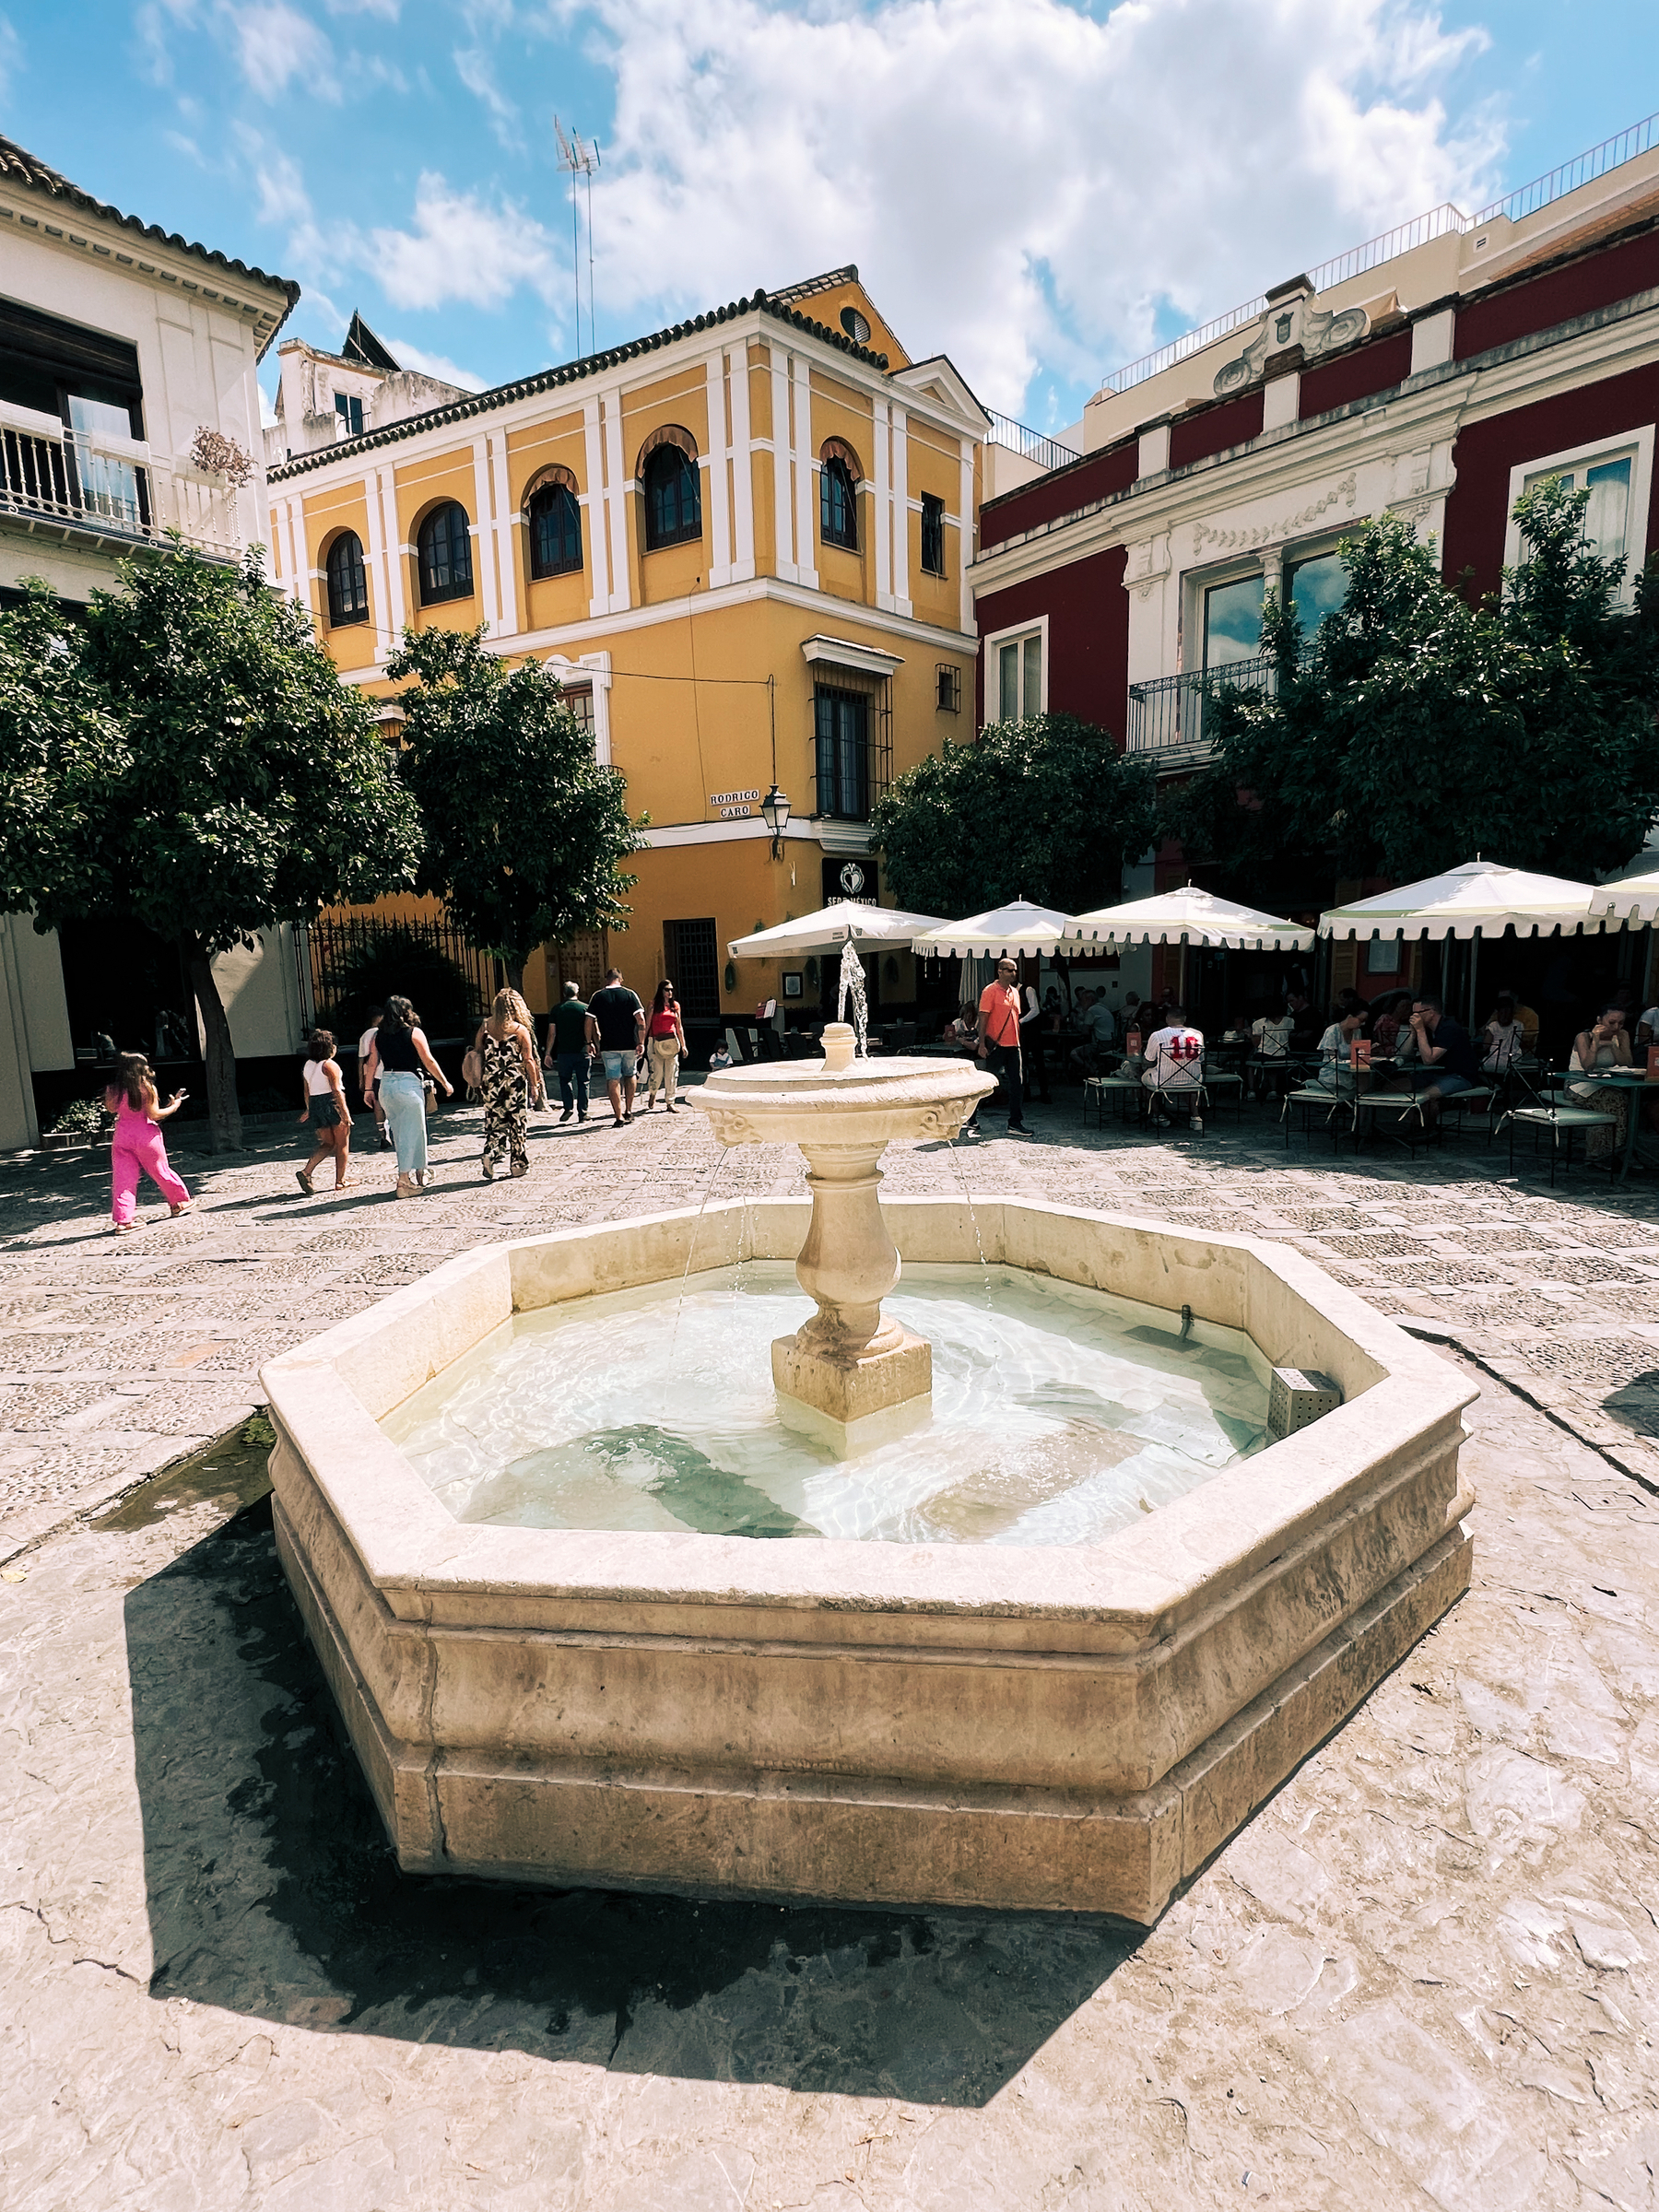 A fountain in a square in Santa Cruz, a classic neighborhood in Sevilla. Narrow streets and classic buildings. 